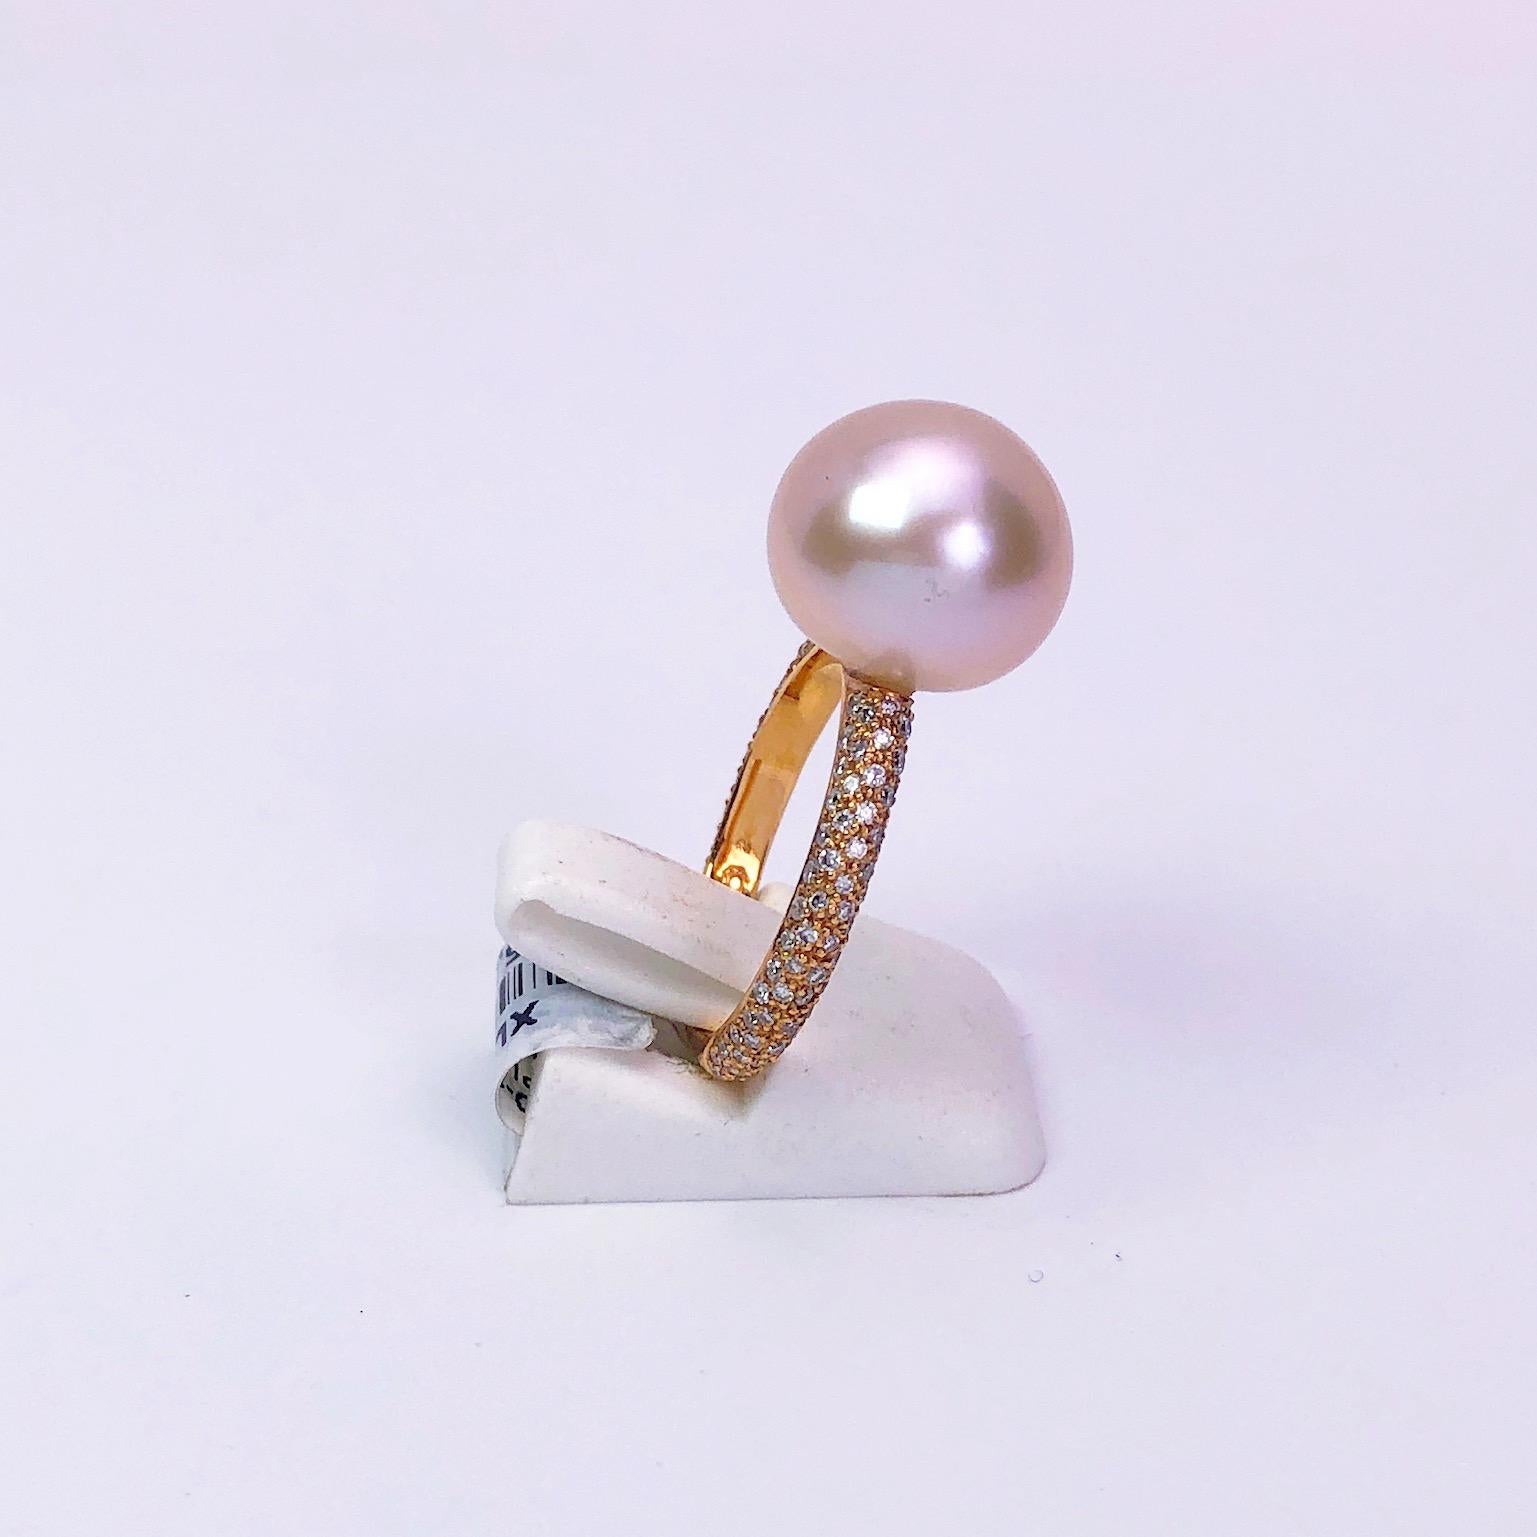 Cellini Jewelers NYC 18 karat rose gold ring set with a single pink South Sea Pearl. The pearl sits on a micro pave diamond shank.
Total Diamond weight 0.61 carats
Pearl 12.8 mm
Stamped 750
Size 6.75 sizing may be available